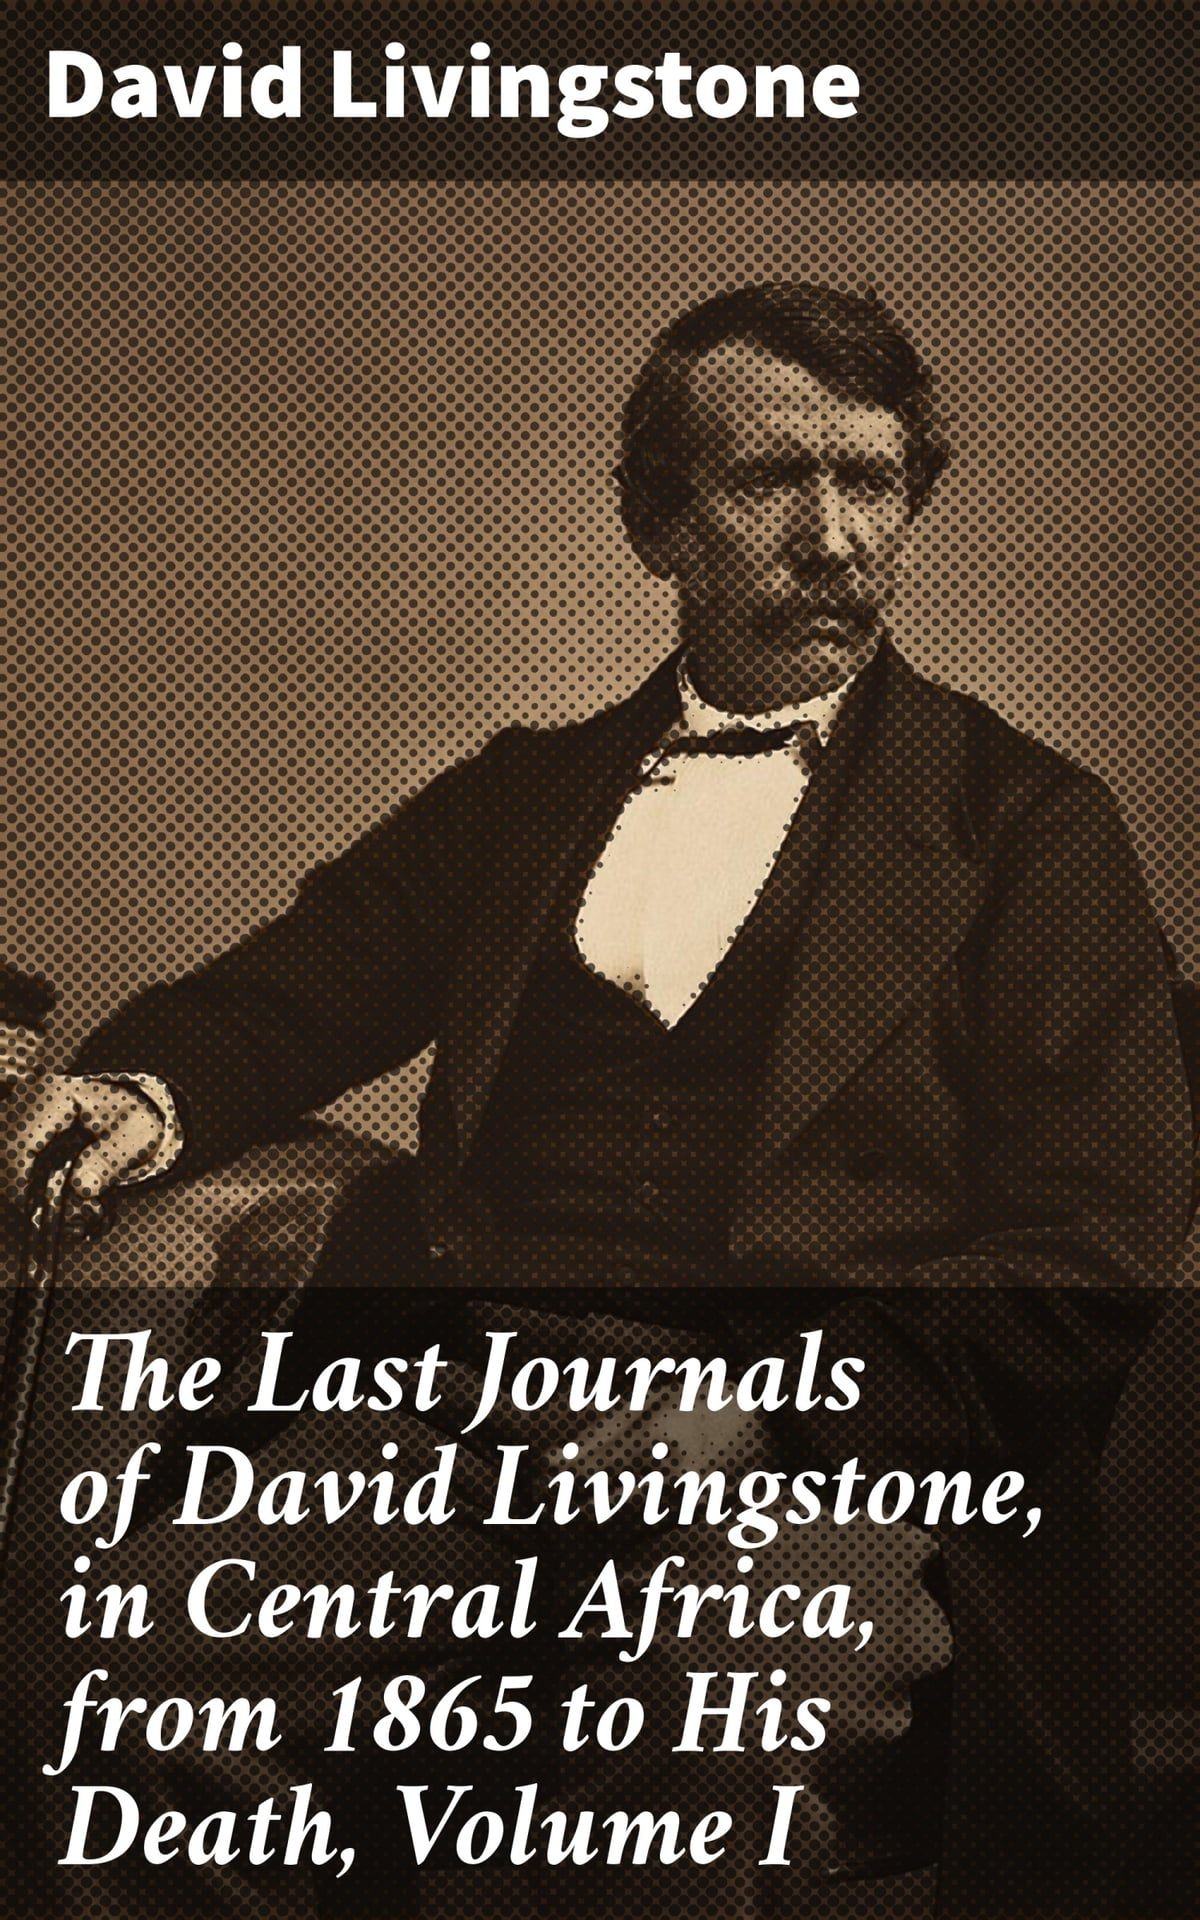 The Last Journals of David Livingstone, in Central Africa